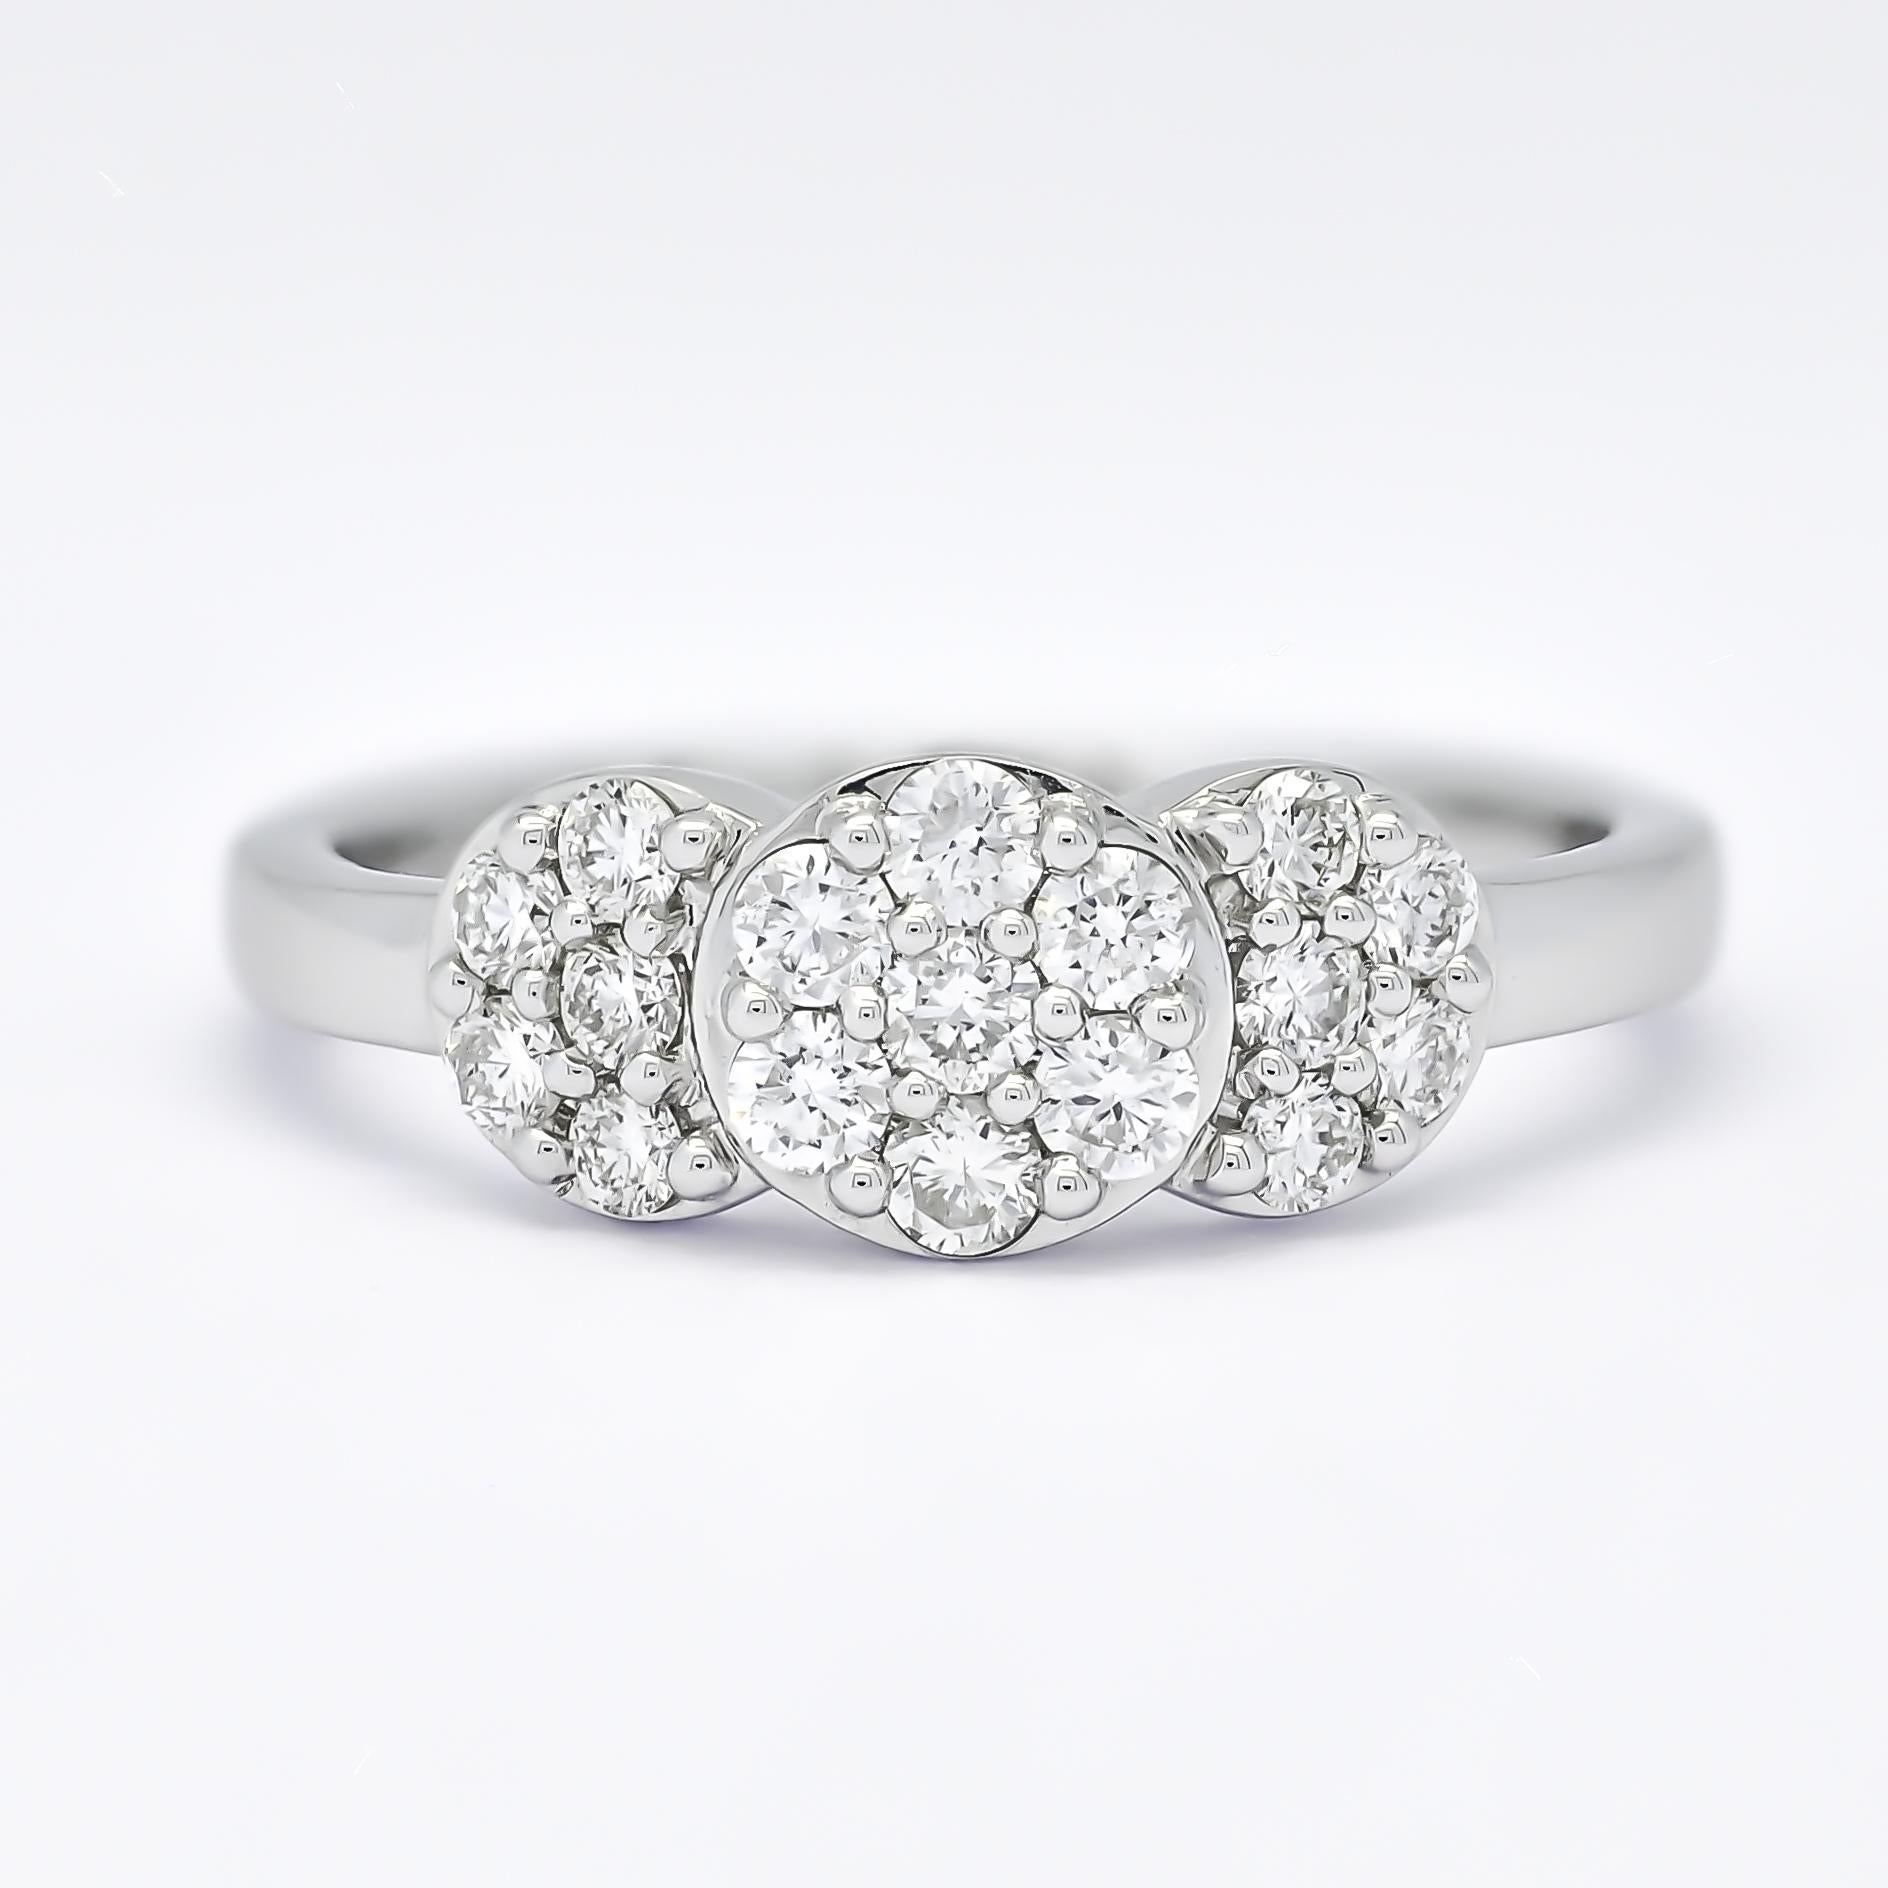 Incredibly glamorous and luxurious, this ring is filled with a cluster of round brilliant diamonds to form the round shapes and Crescent Shape in bezel setting and gives the illusion of  large diamonds. 

Metal: 18kt White Gold
Weight:3.37 Grams